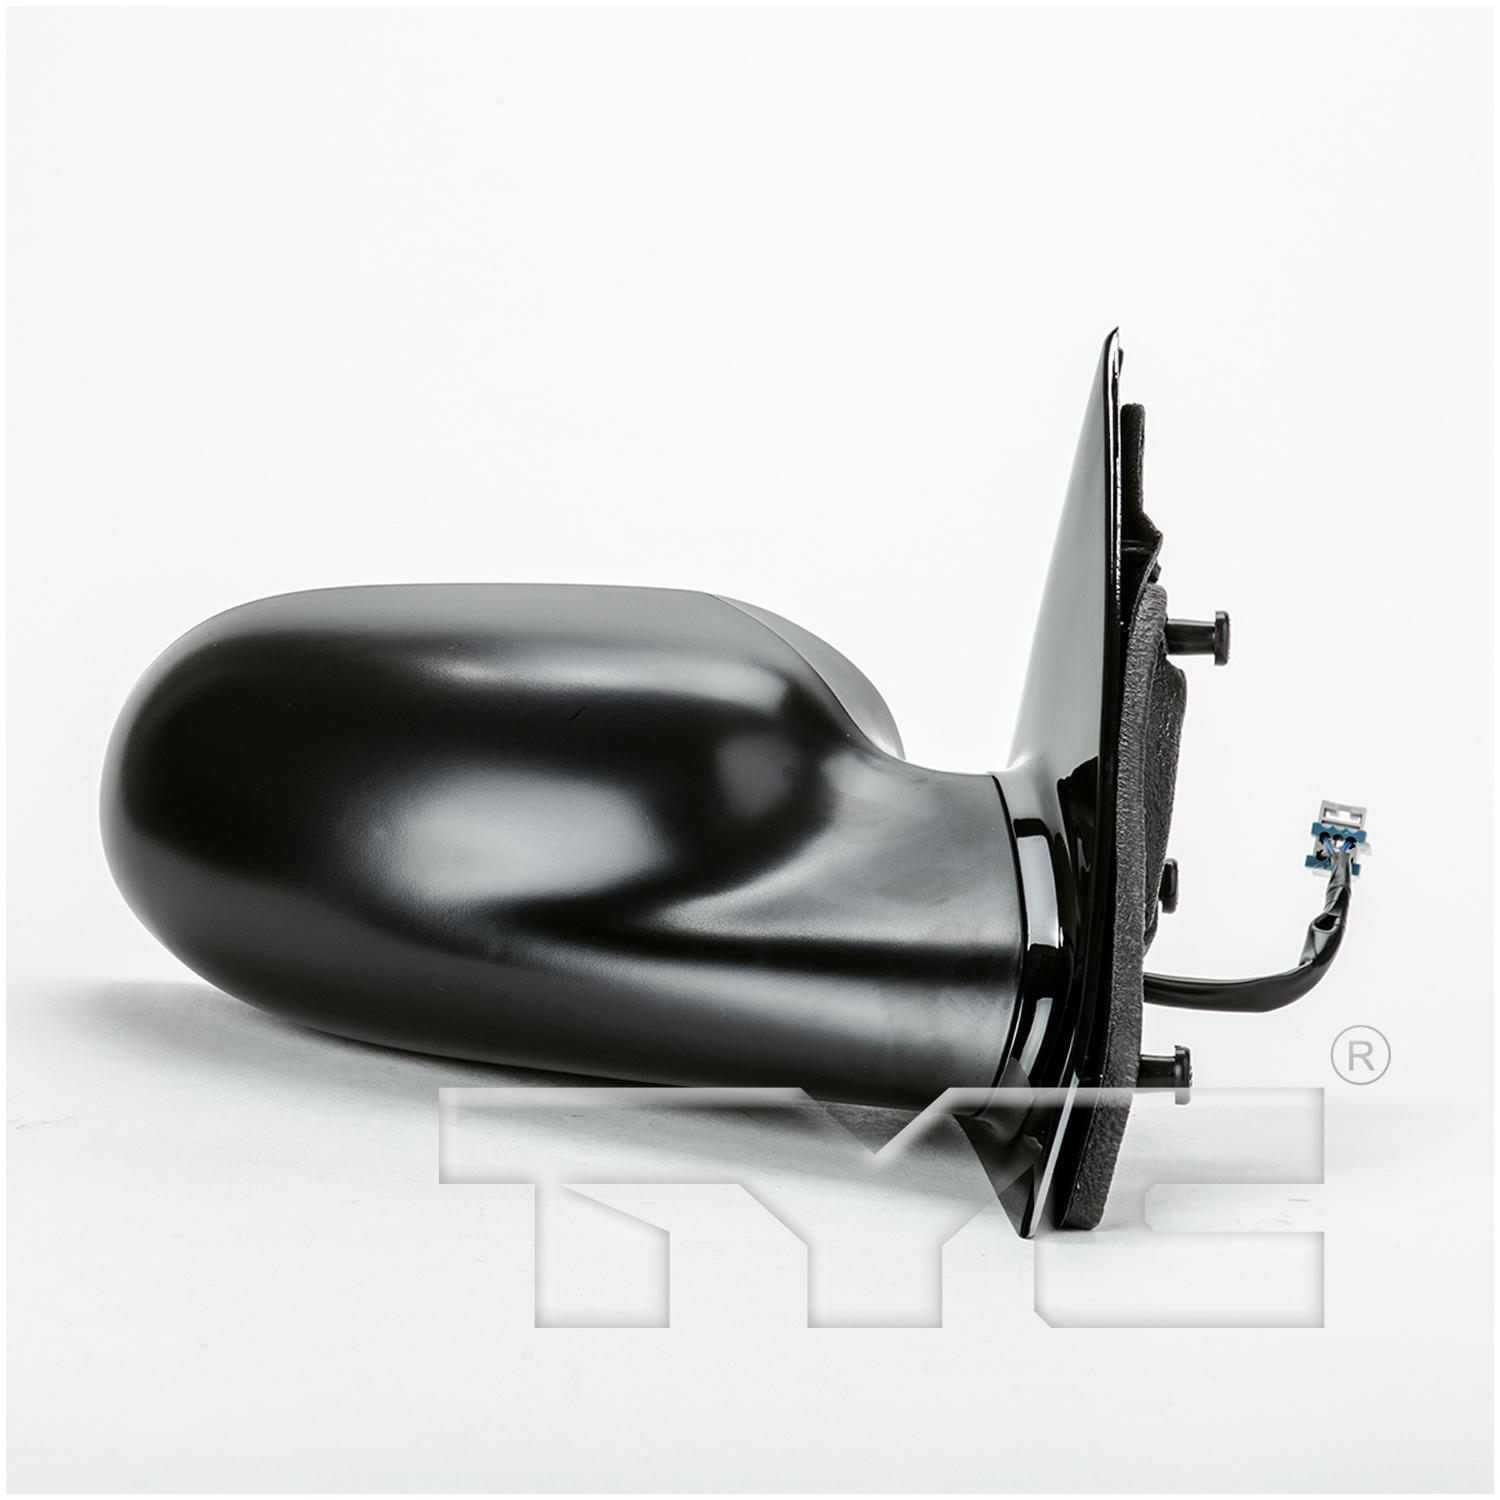 Aftermarket MIRRORS for SATURN - LW1, LW1,00-00,RT Mirror outside rear view